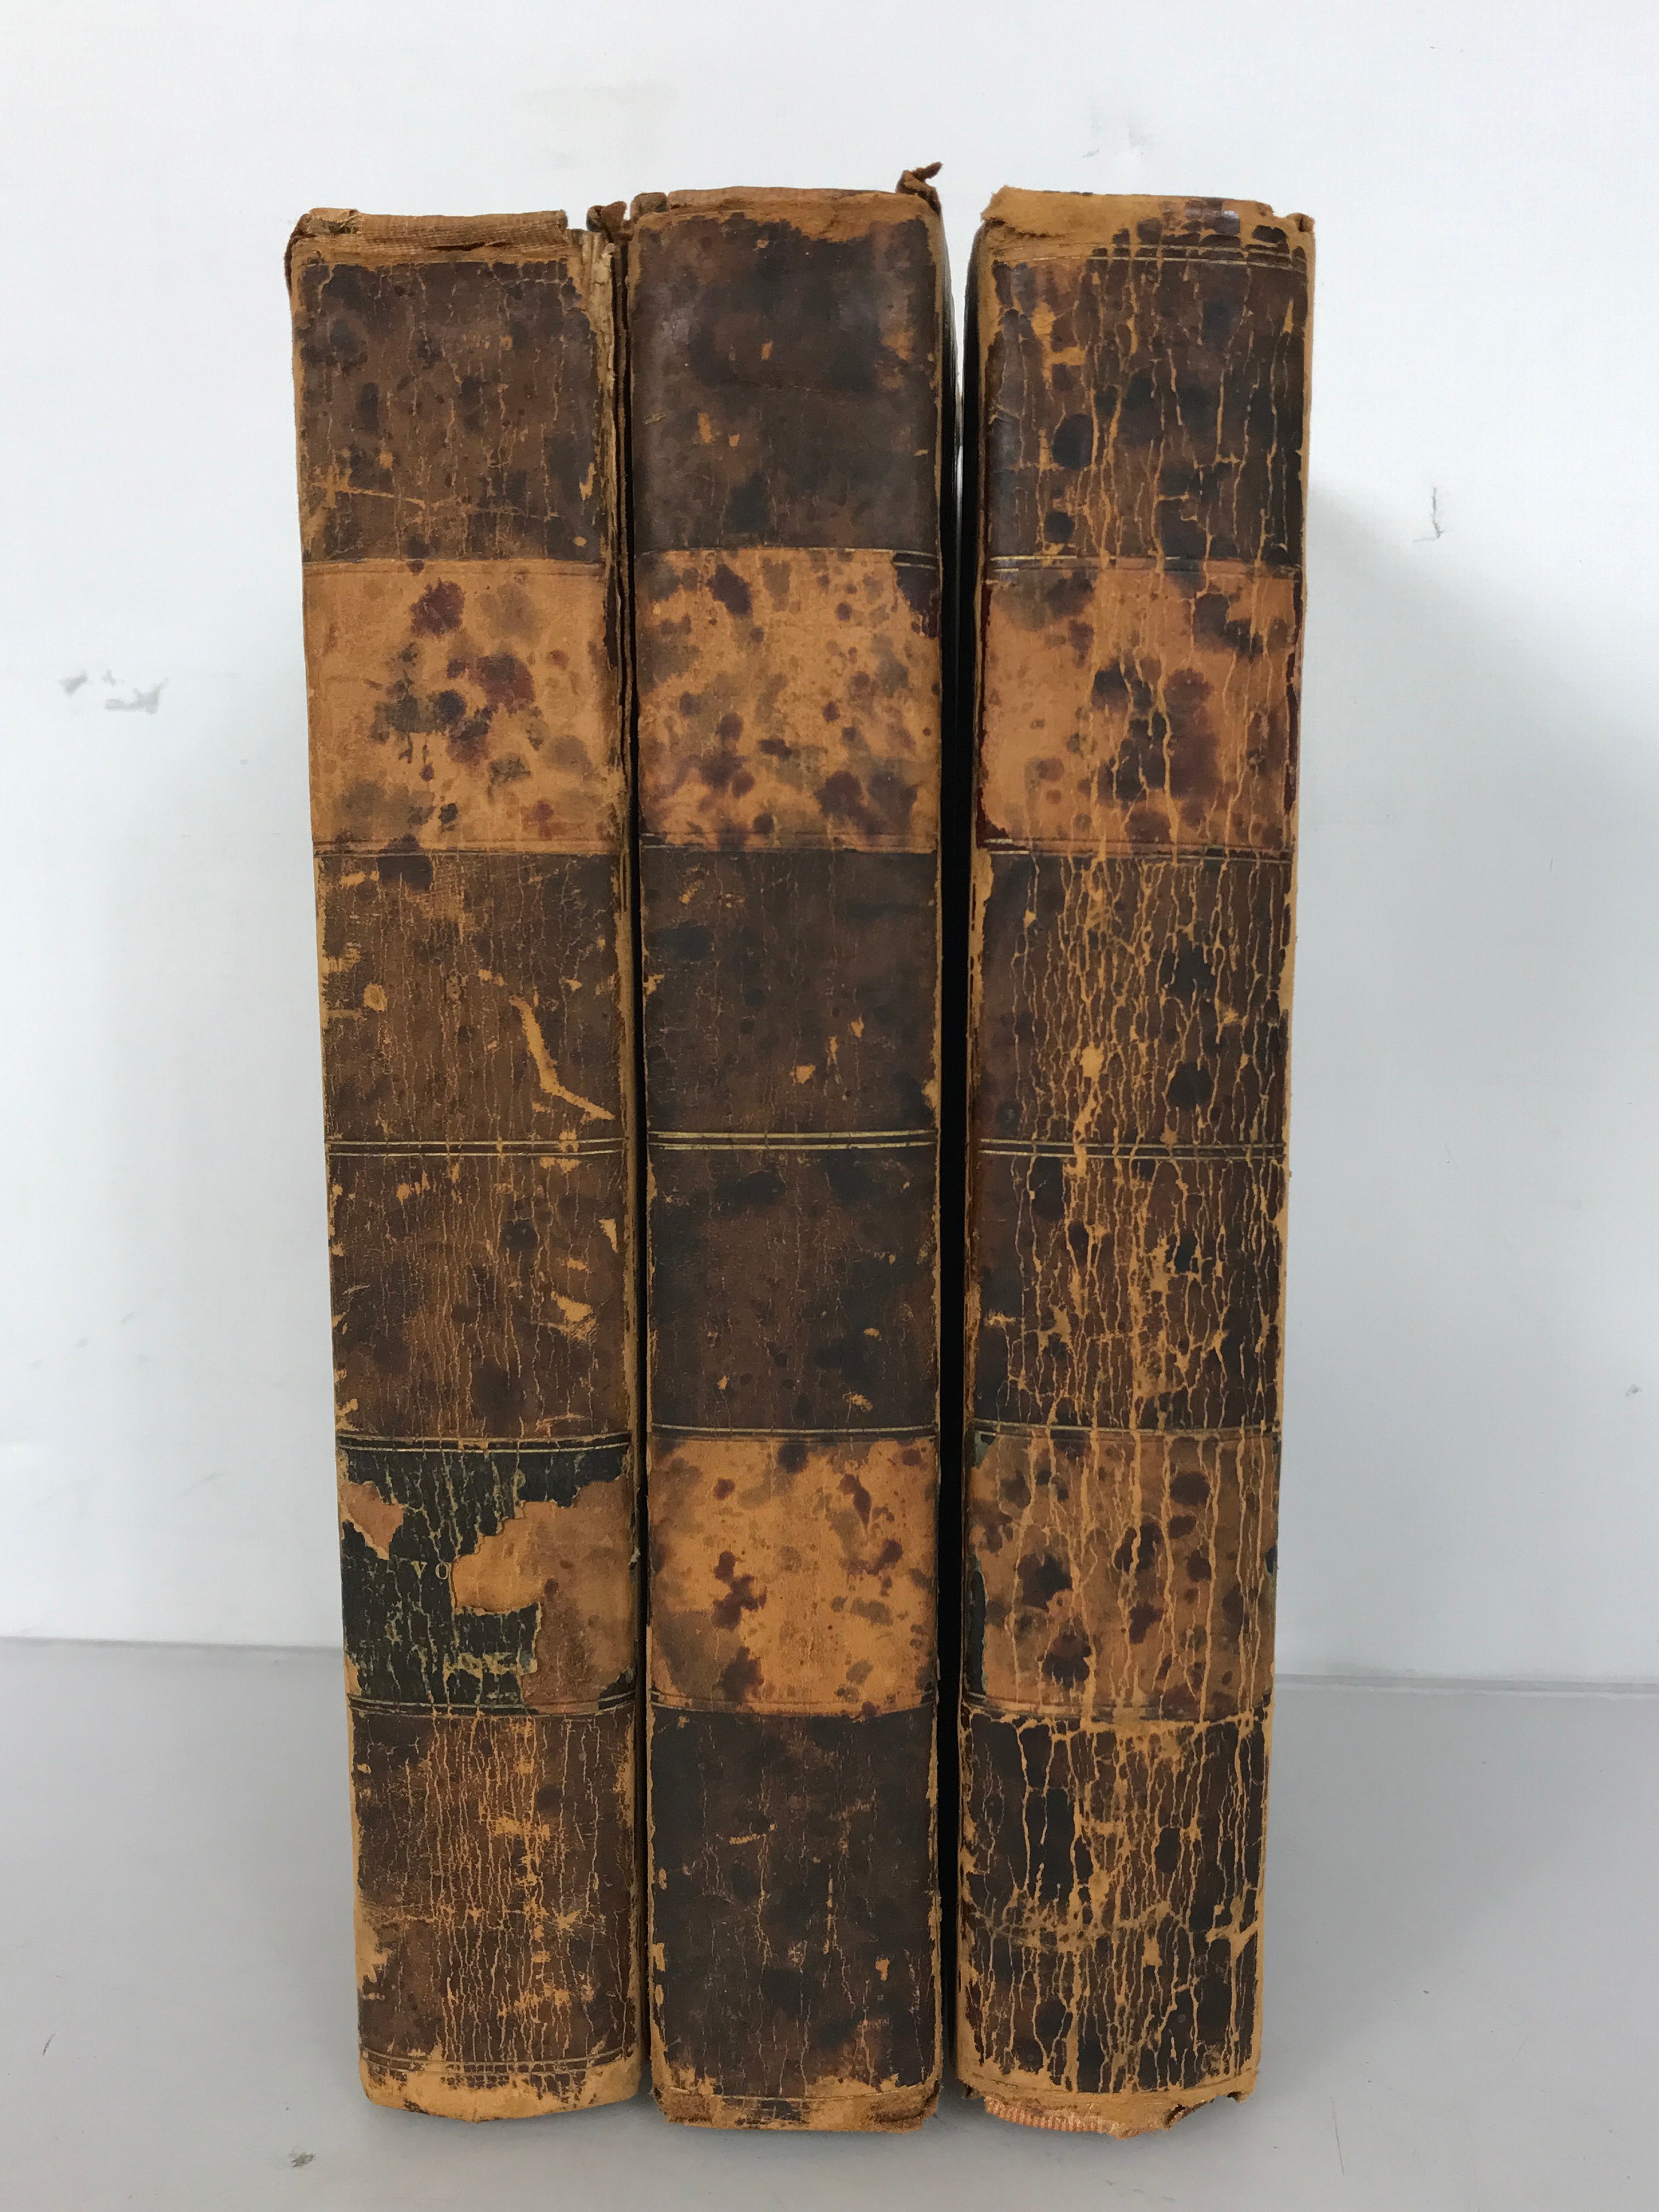 Memoir, Correspondence and Miscellanies From the Papers of Thomas Jefferson Vols. 2-4 1829 HC